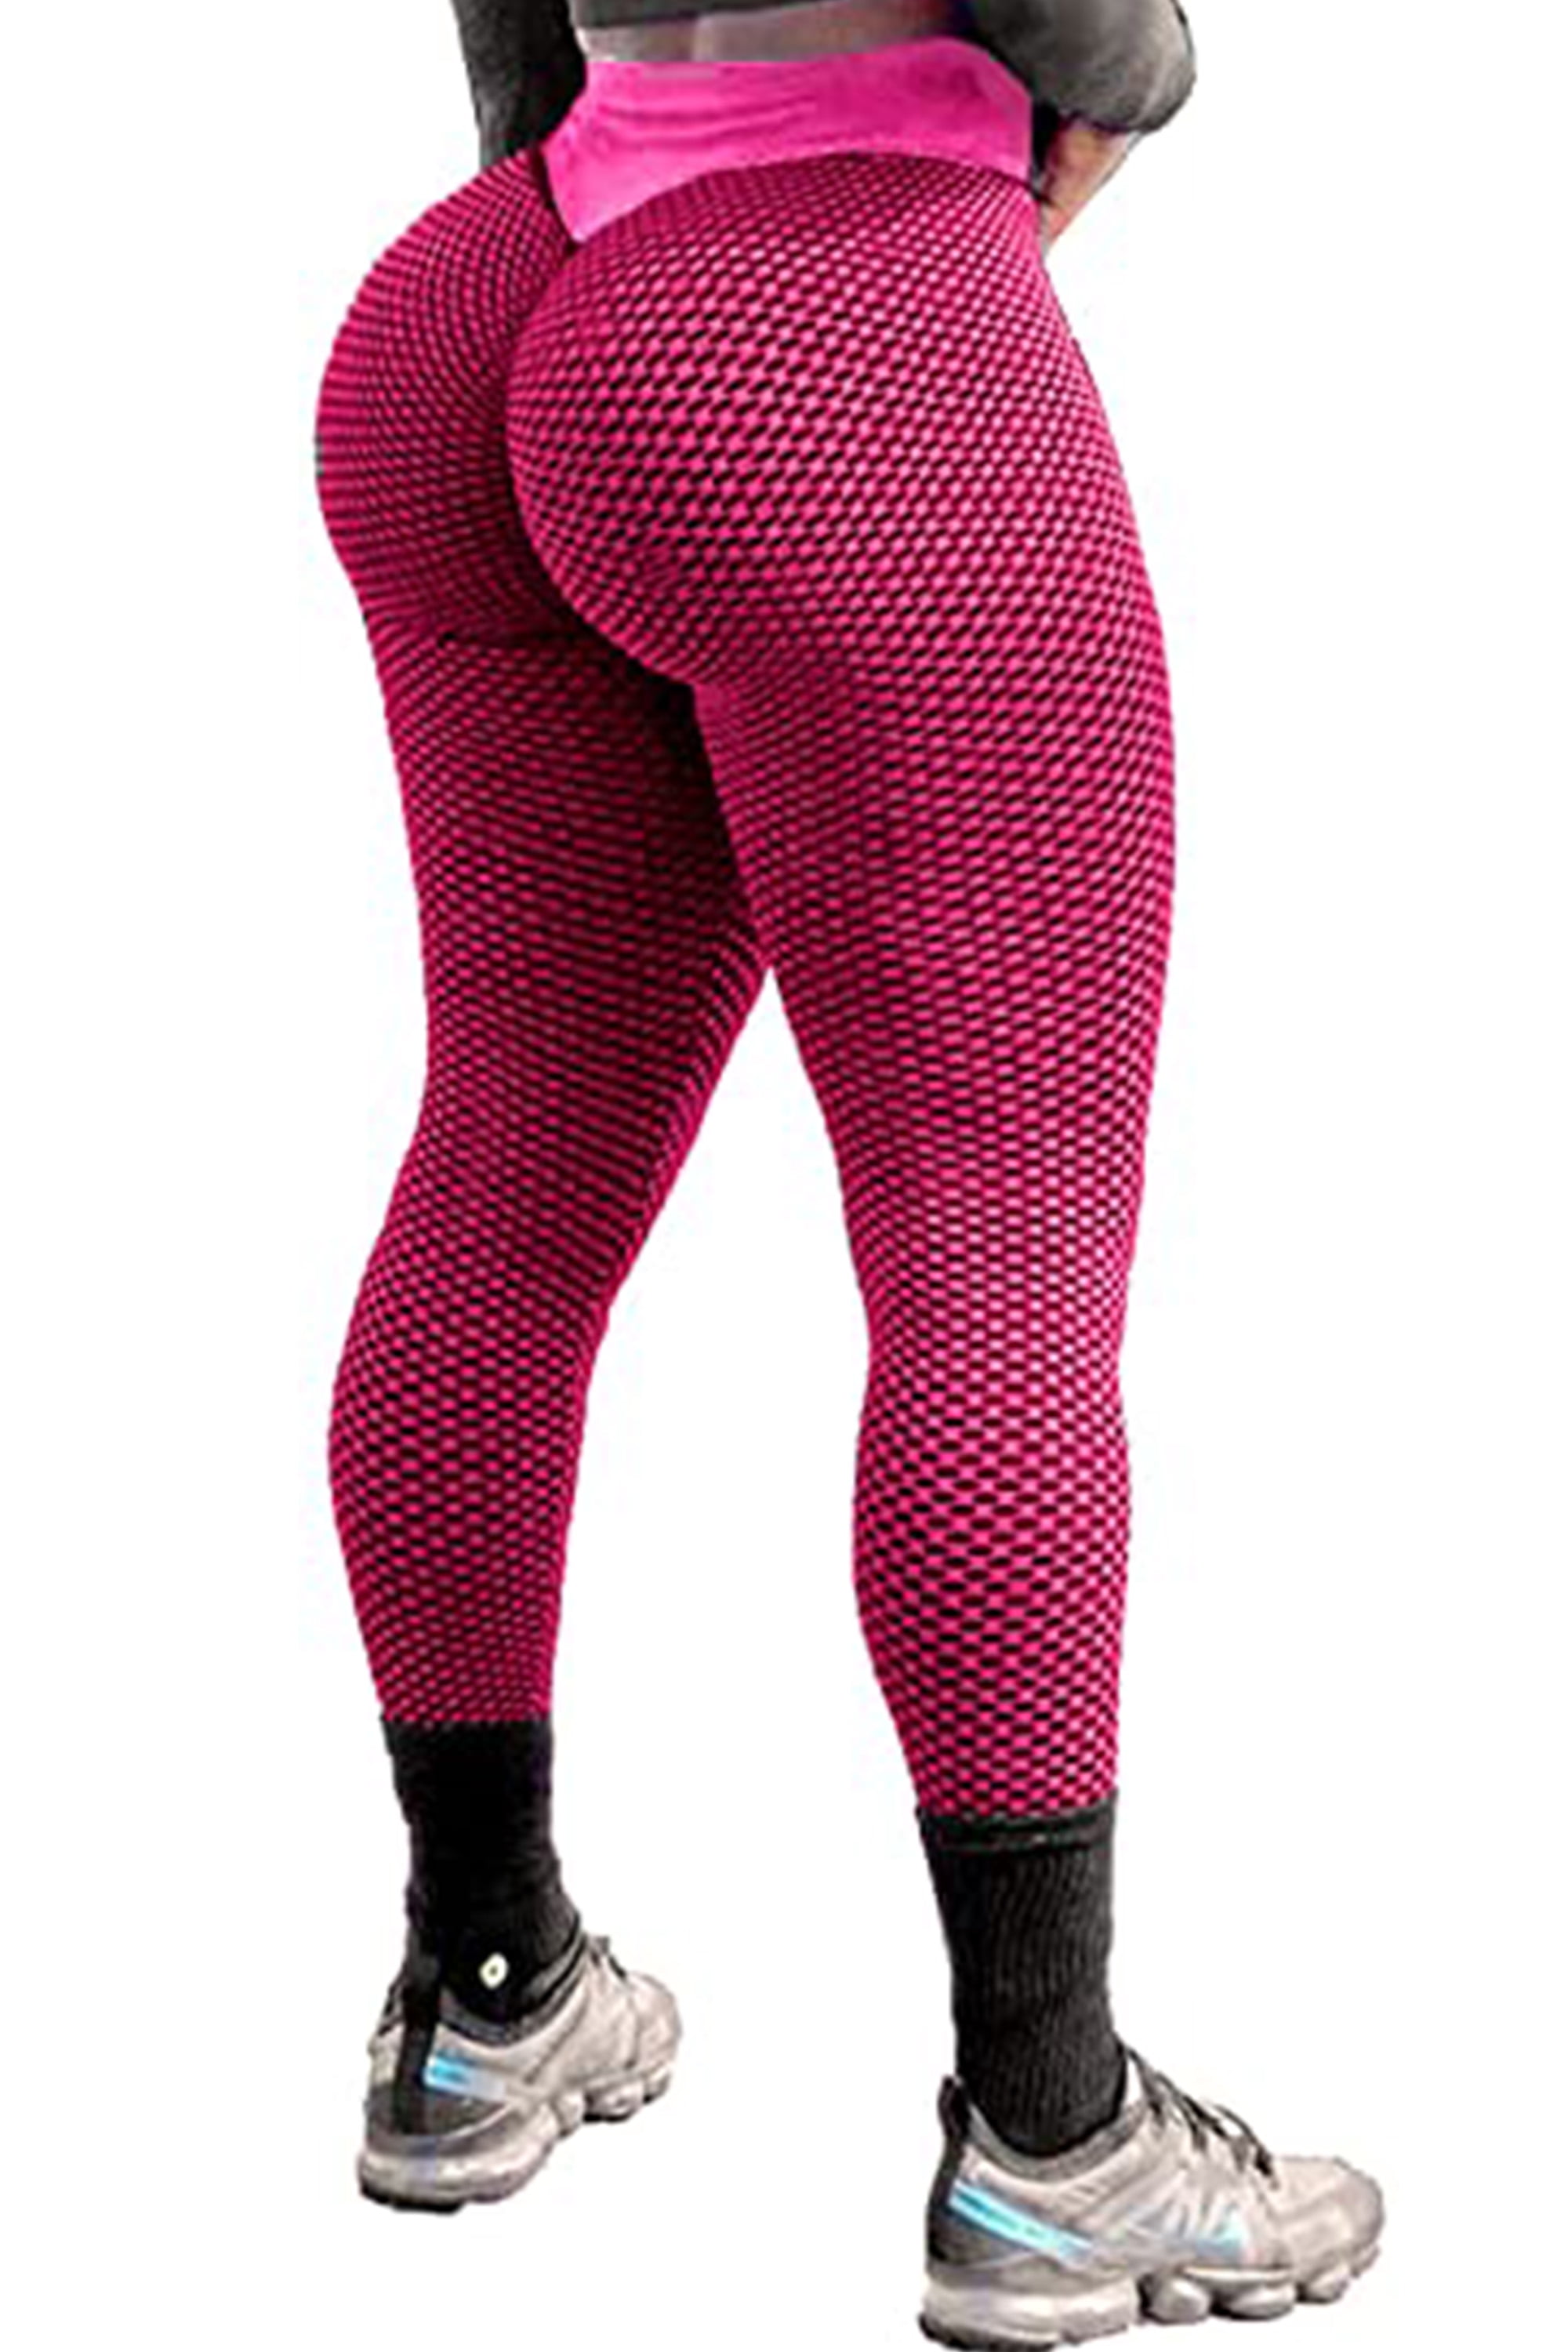 Fittoo Sexy Women Booty Yoga Pants High Waisted Honeycomb Ruched Butt Lift Textured Tummy